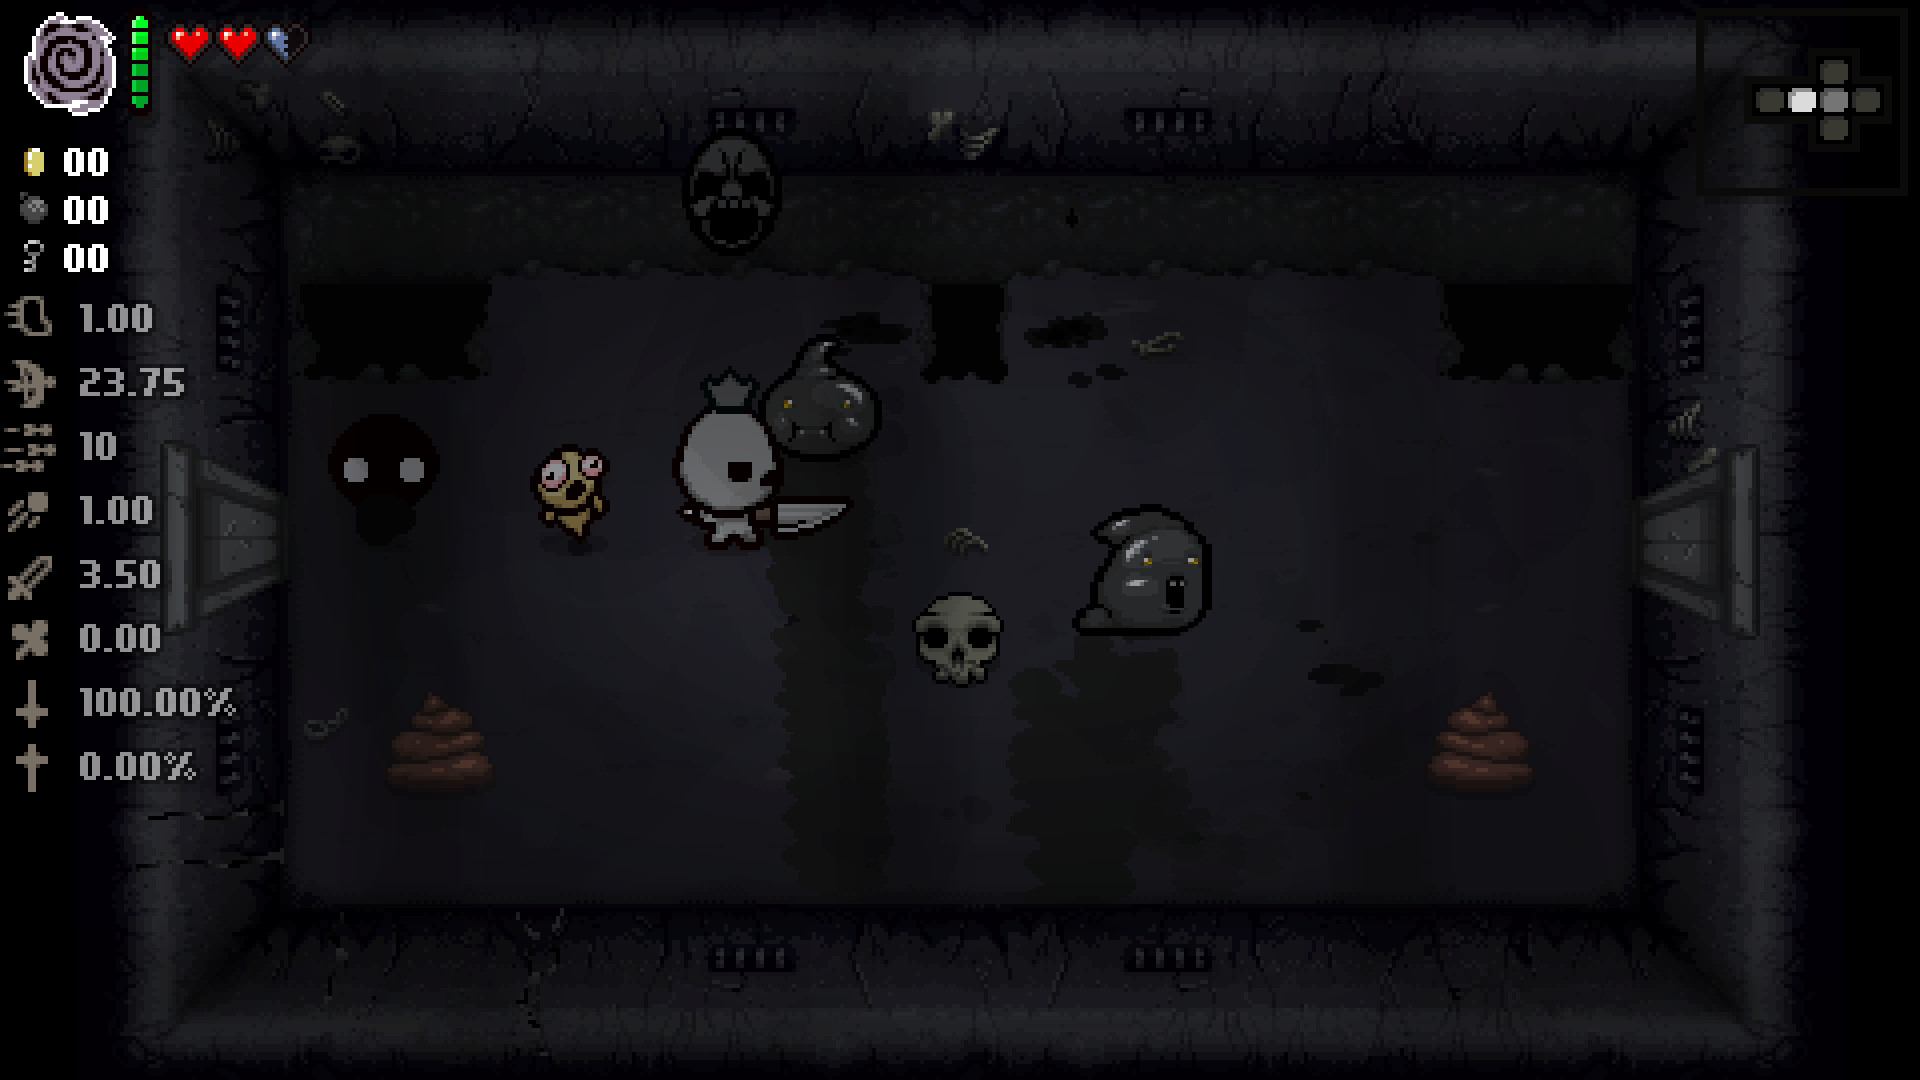 (21.46$) The Binding of Isaac: Afterbirth+ Nintendo Switch Account pixelpuffin.net Activation Link